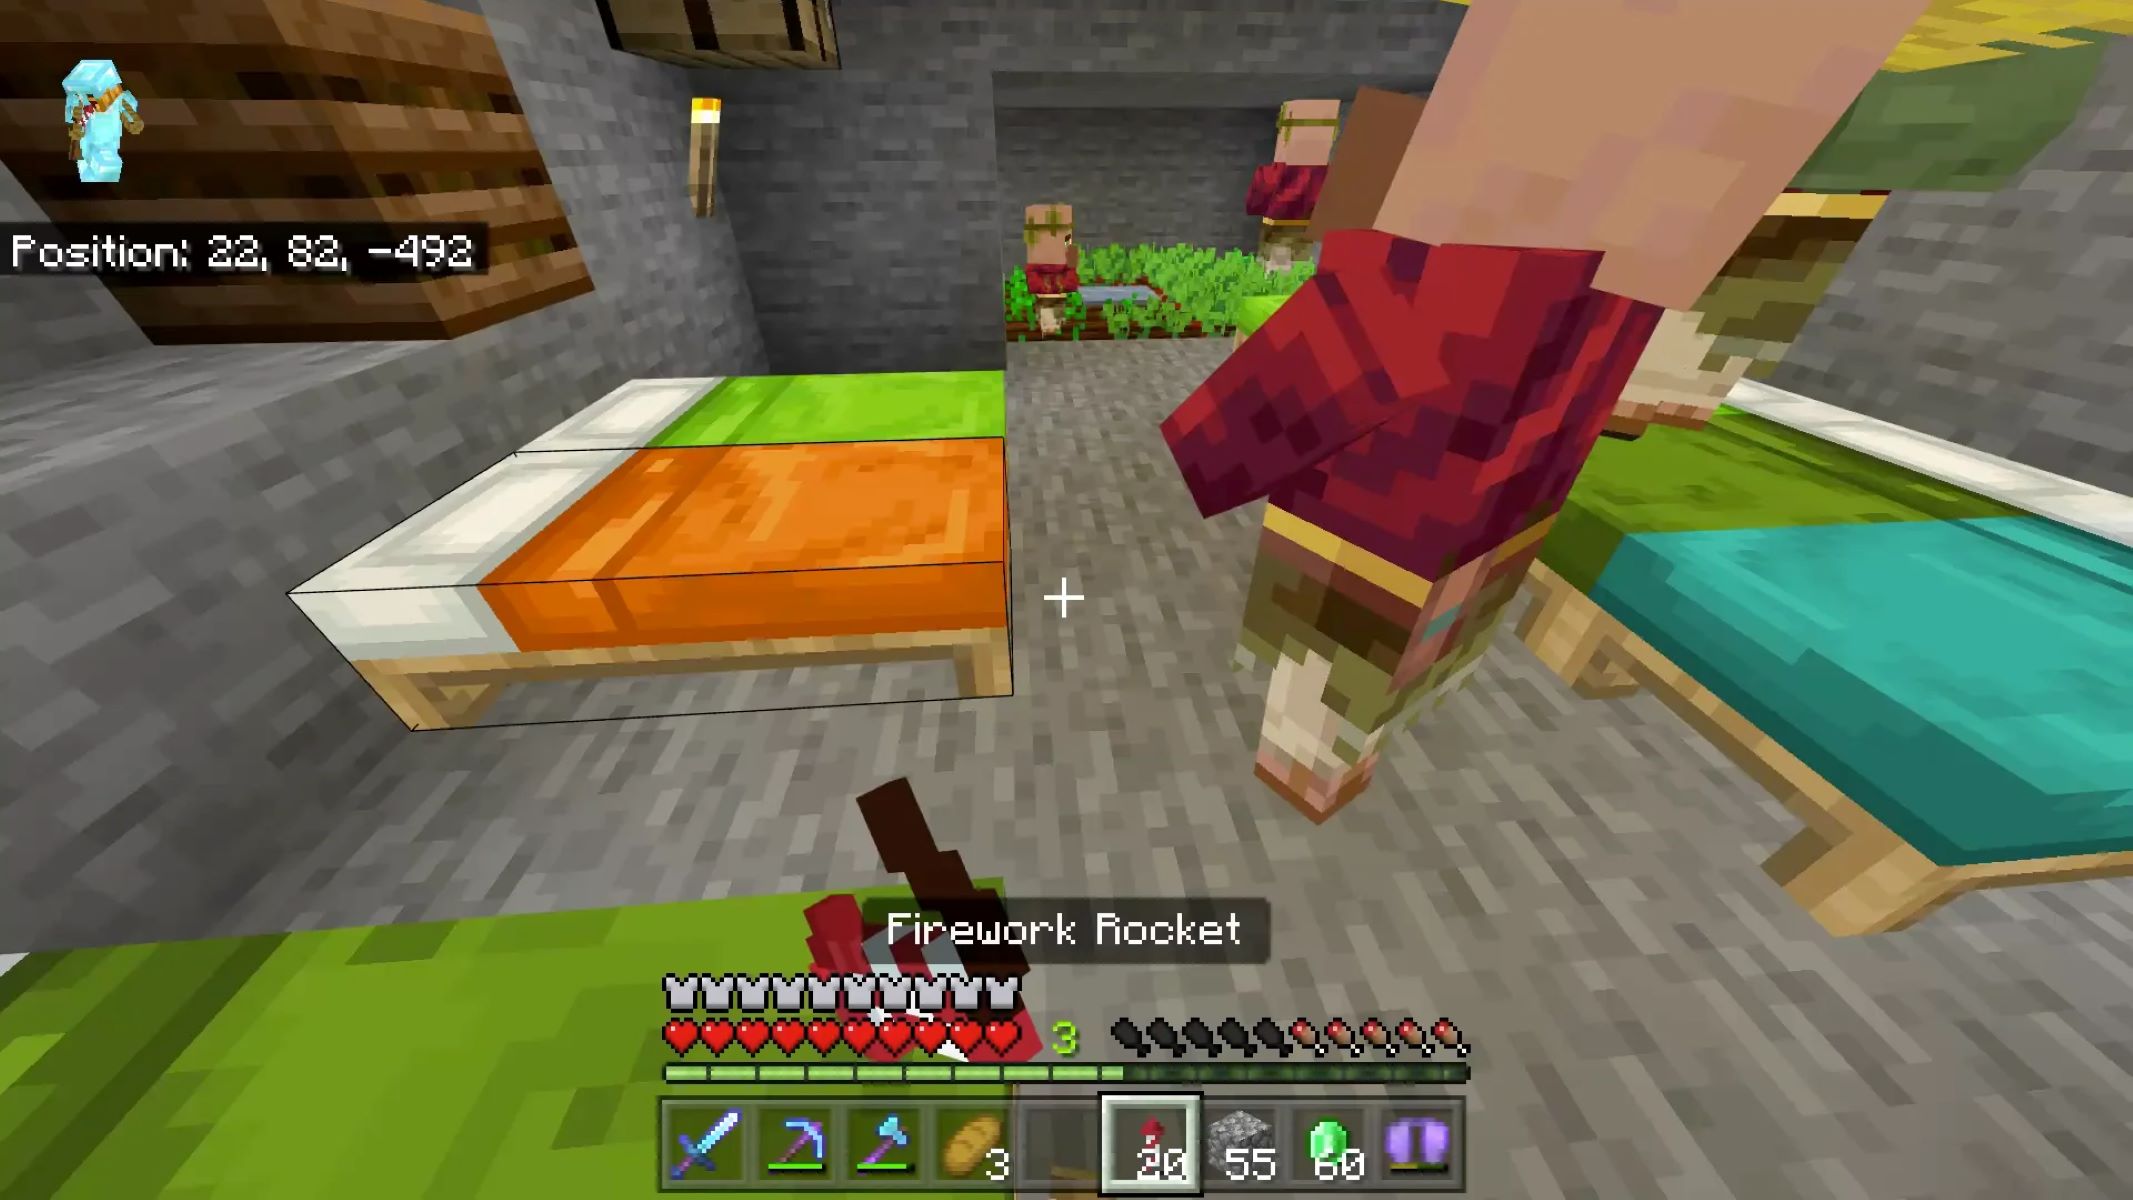 Minecraft Villagers Disappear After Trading, But One Stays – What’s The Secret?